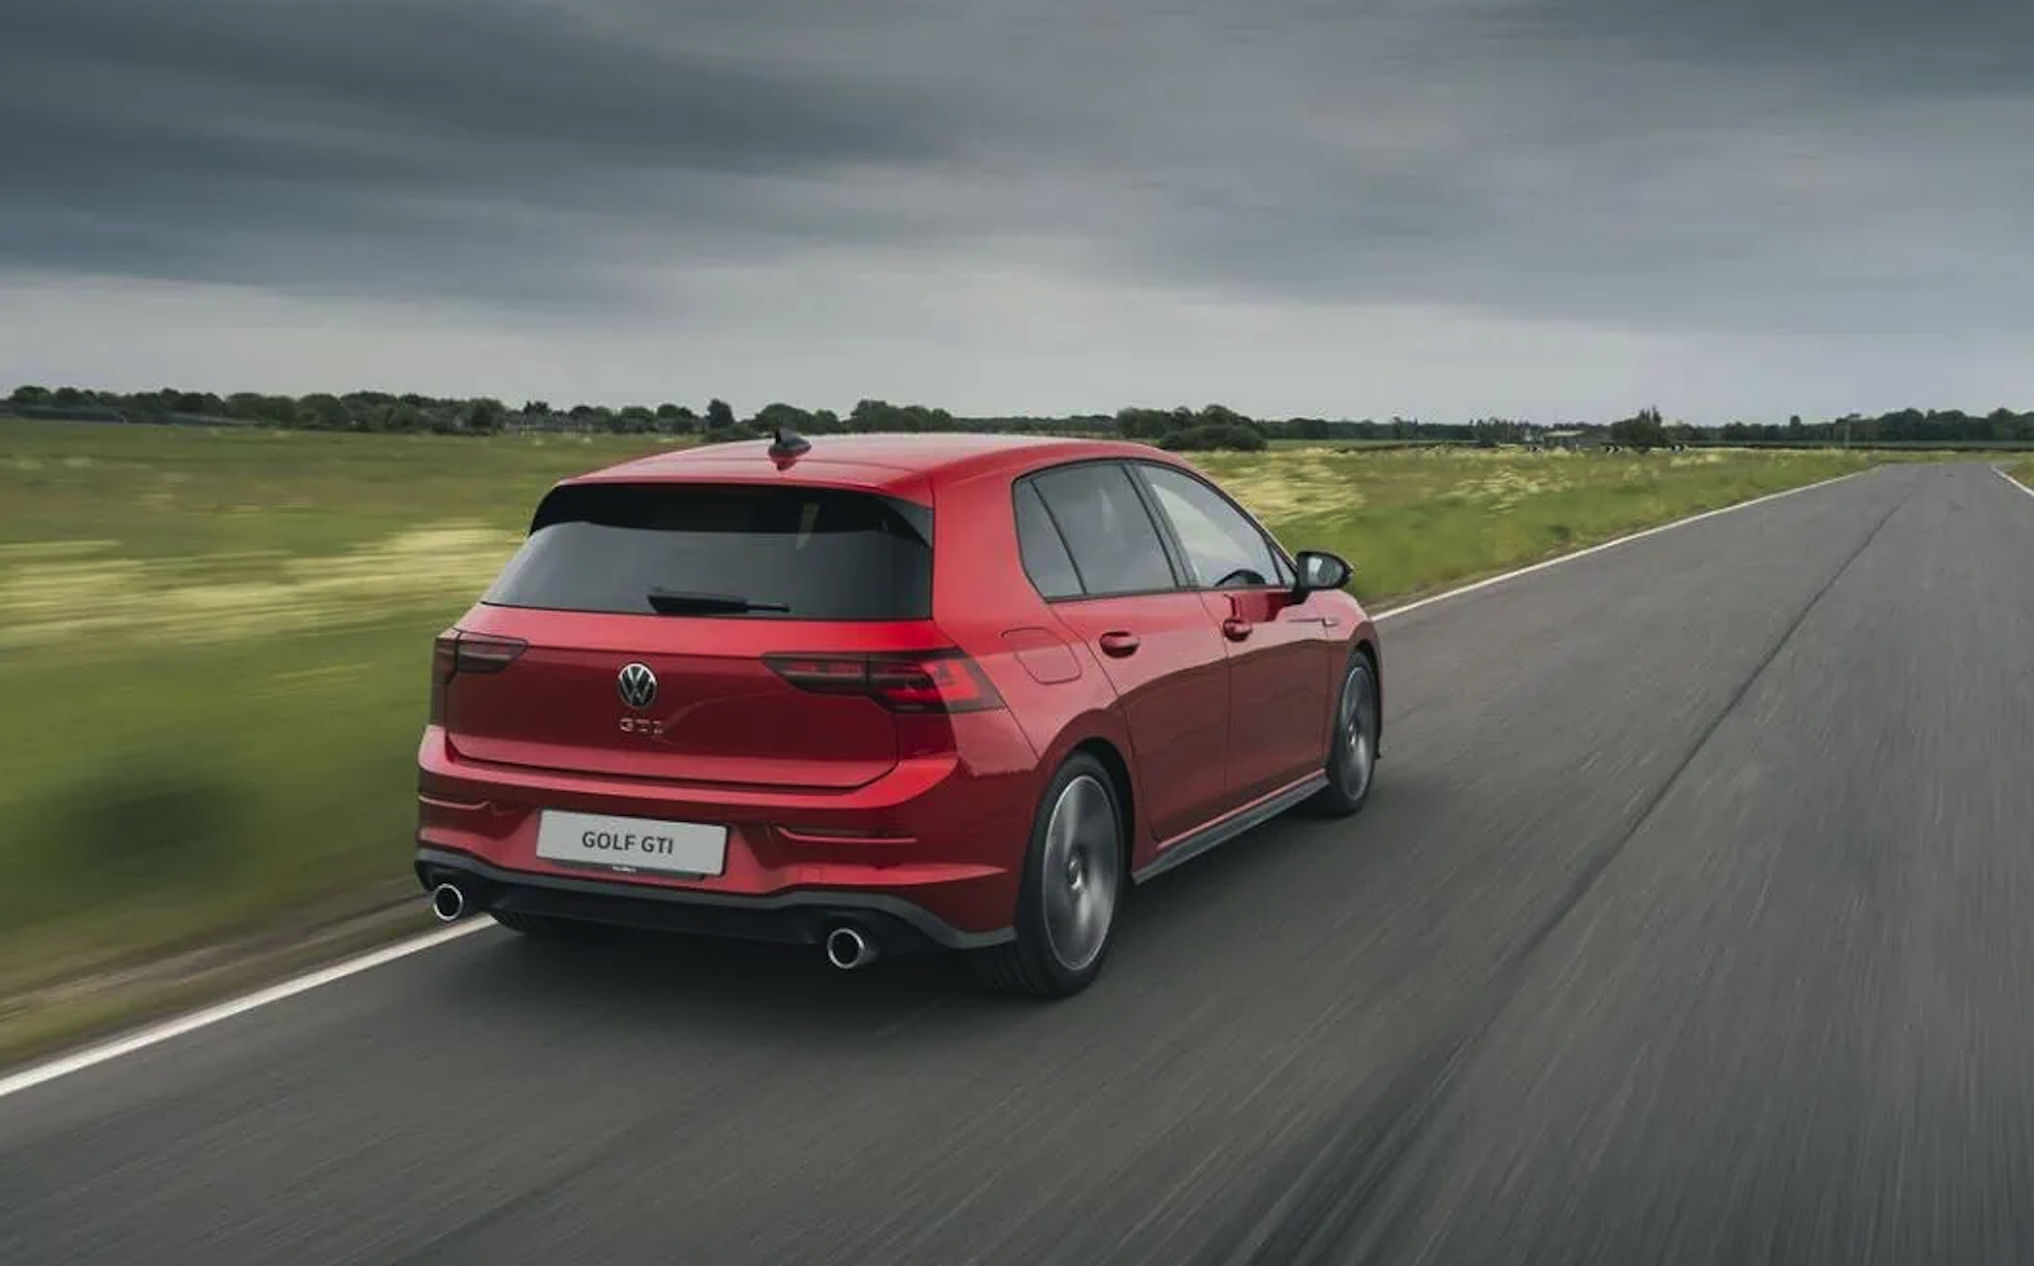 new volkswagen golf gti unveiled with advanced driver aids